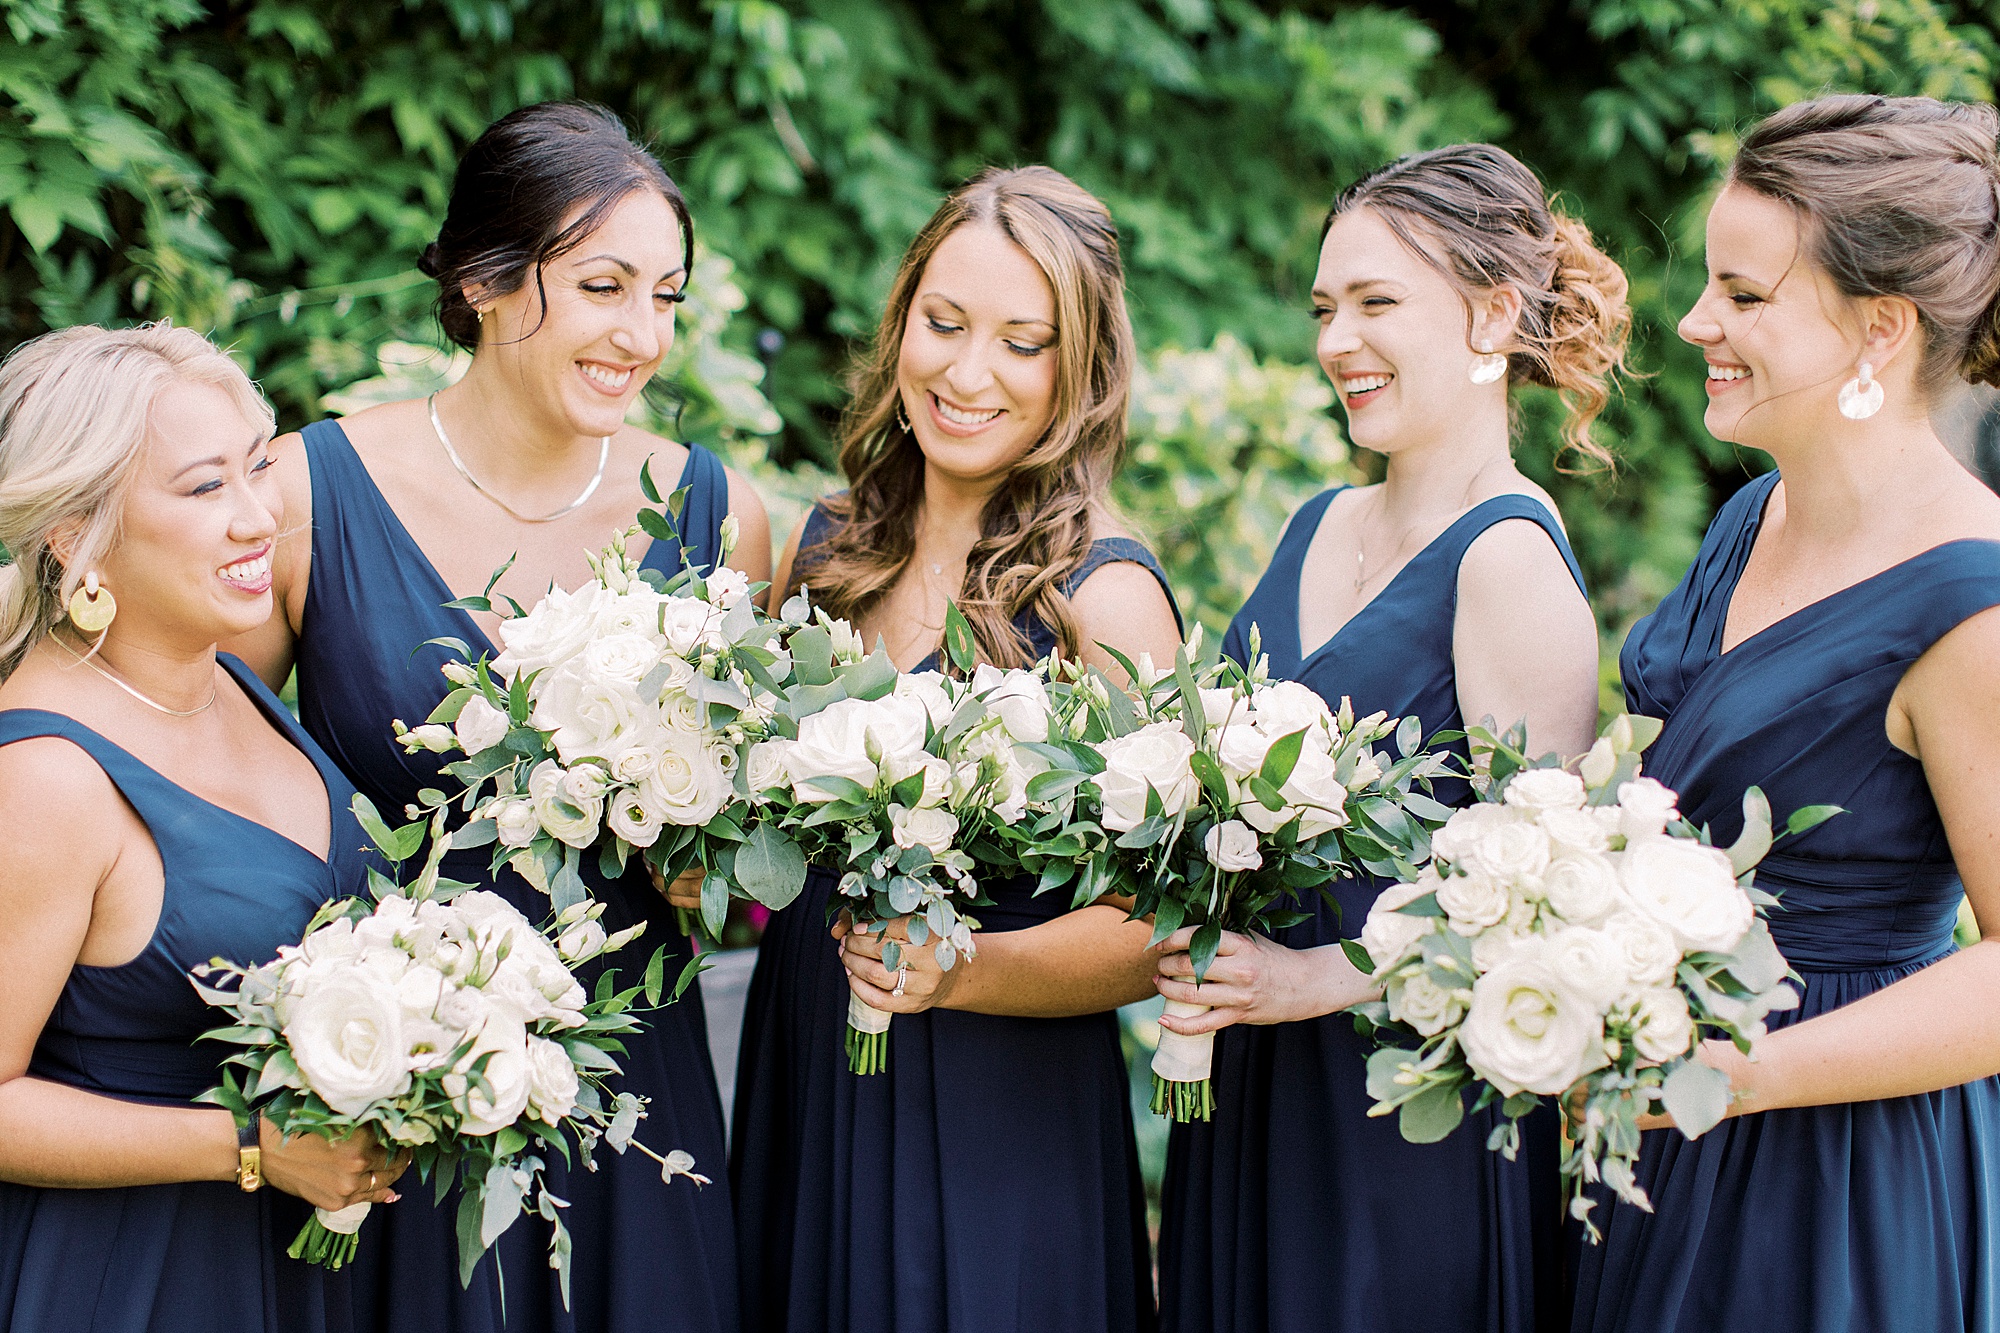 bride and bridesmaids in navy blue laugh holding white bouquets